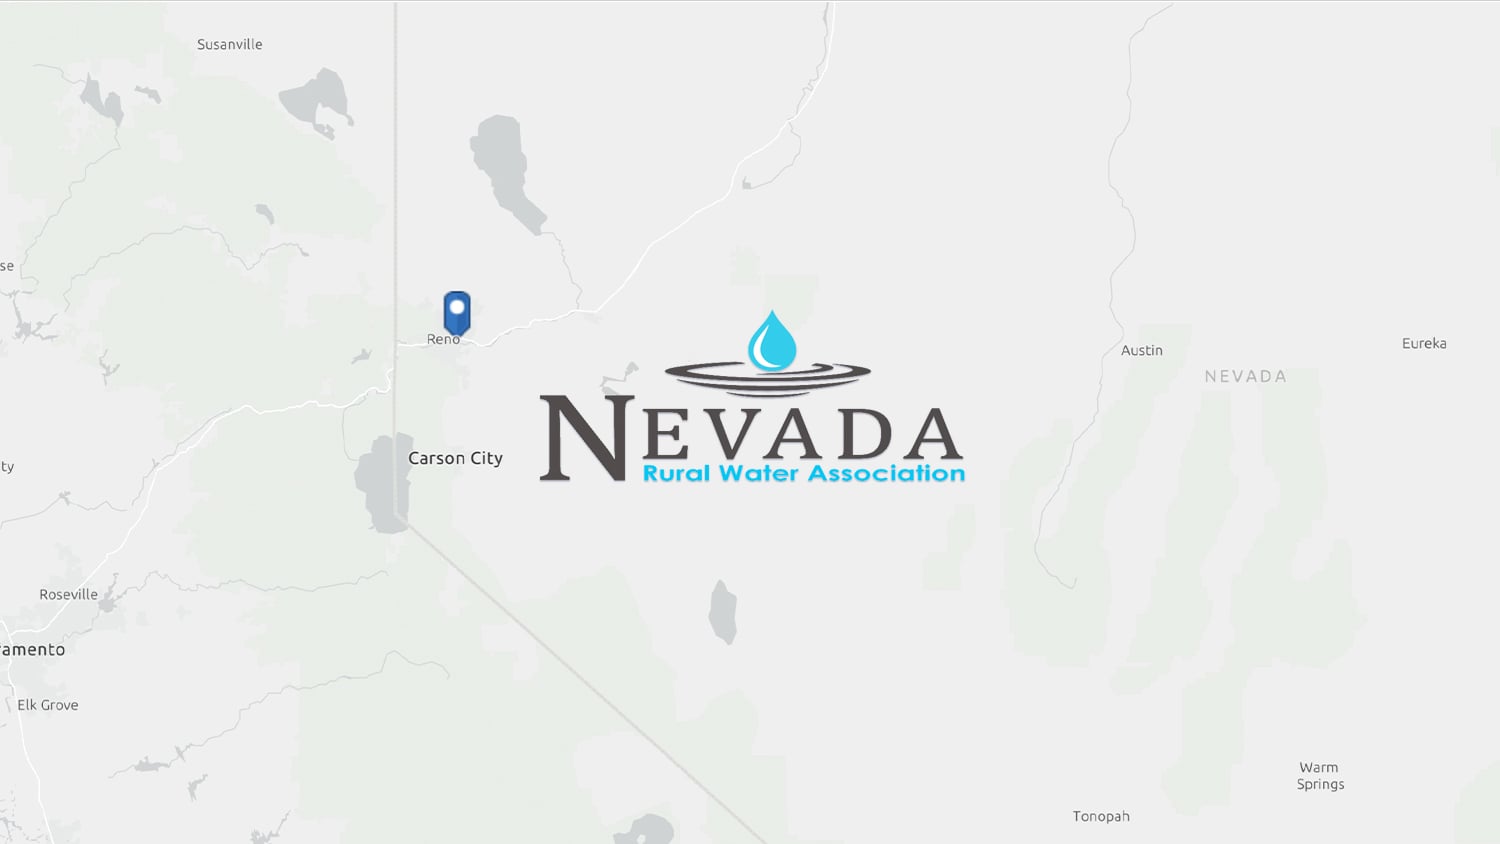 Nevada Rural Water Association Conference Event with Eos Positioning Systems GNSS